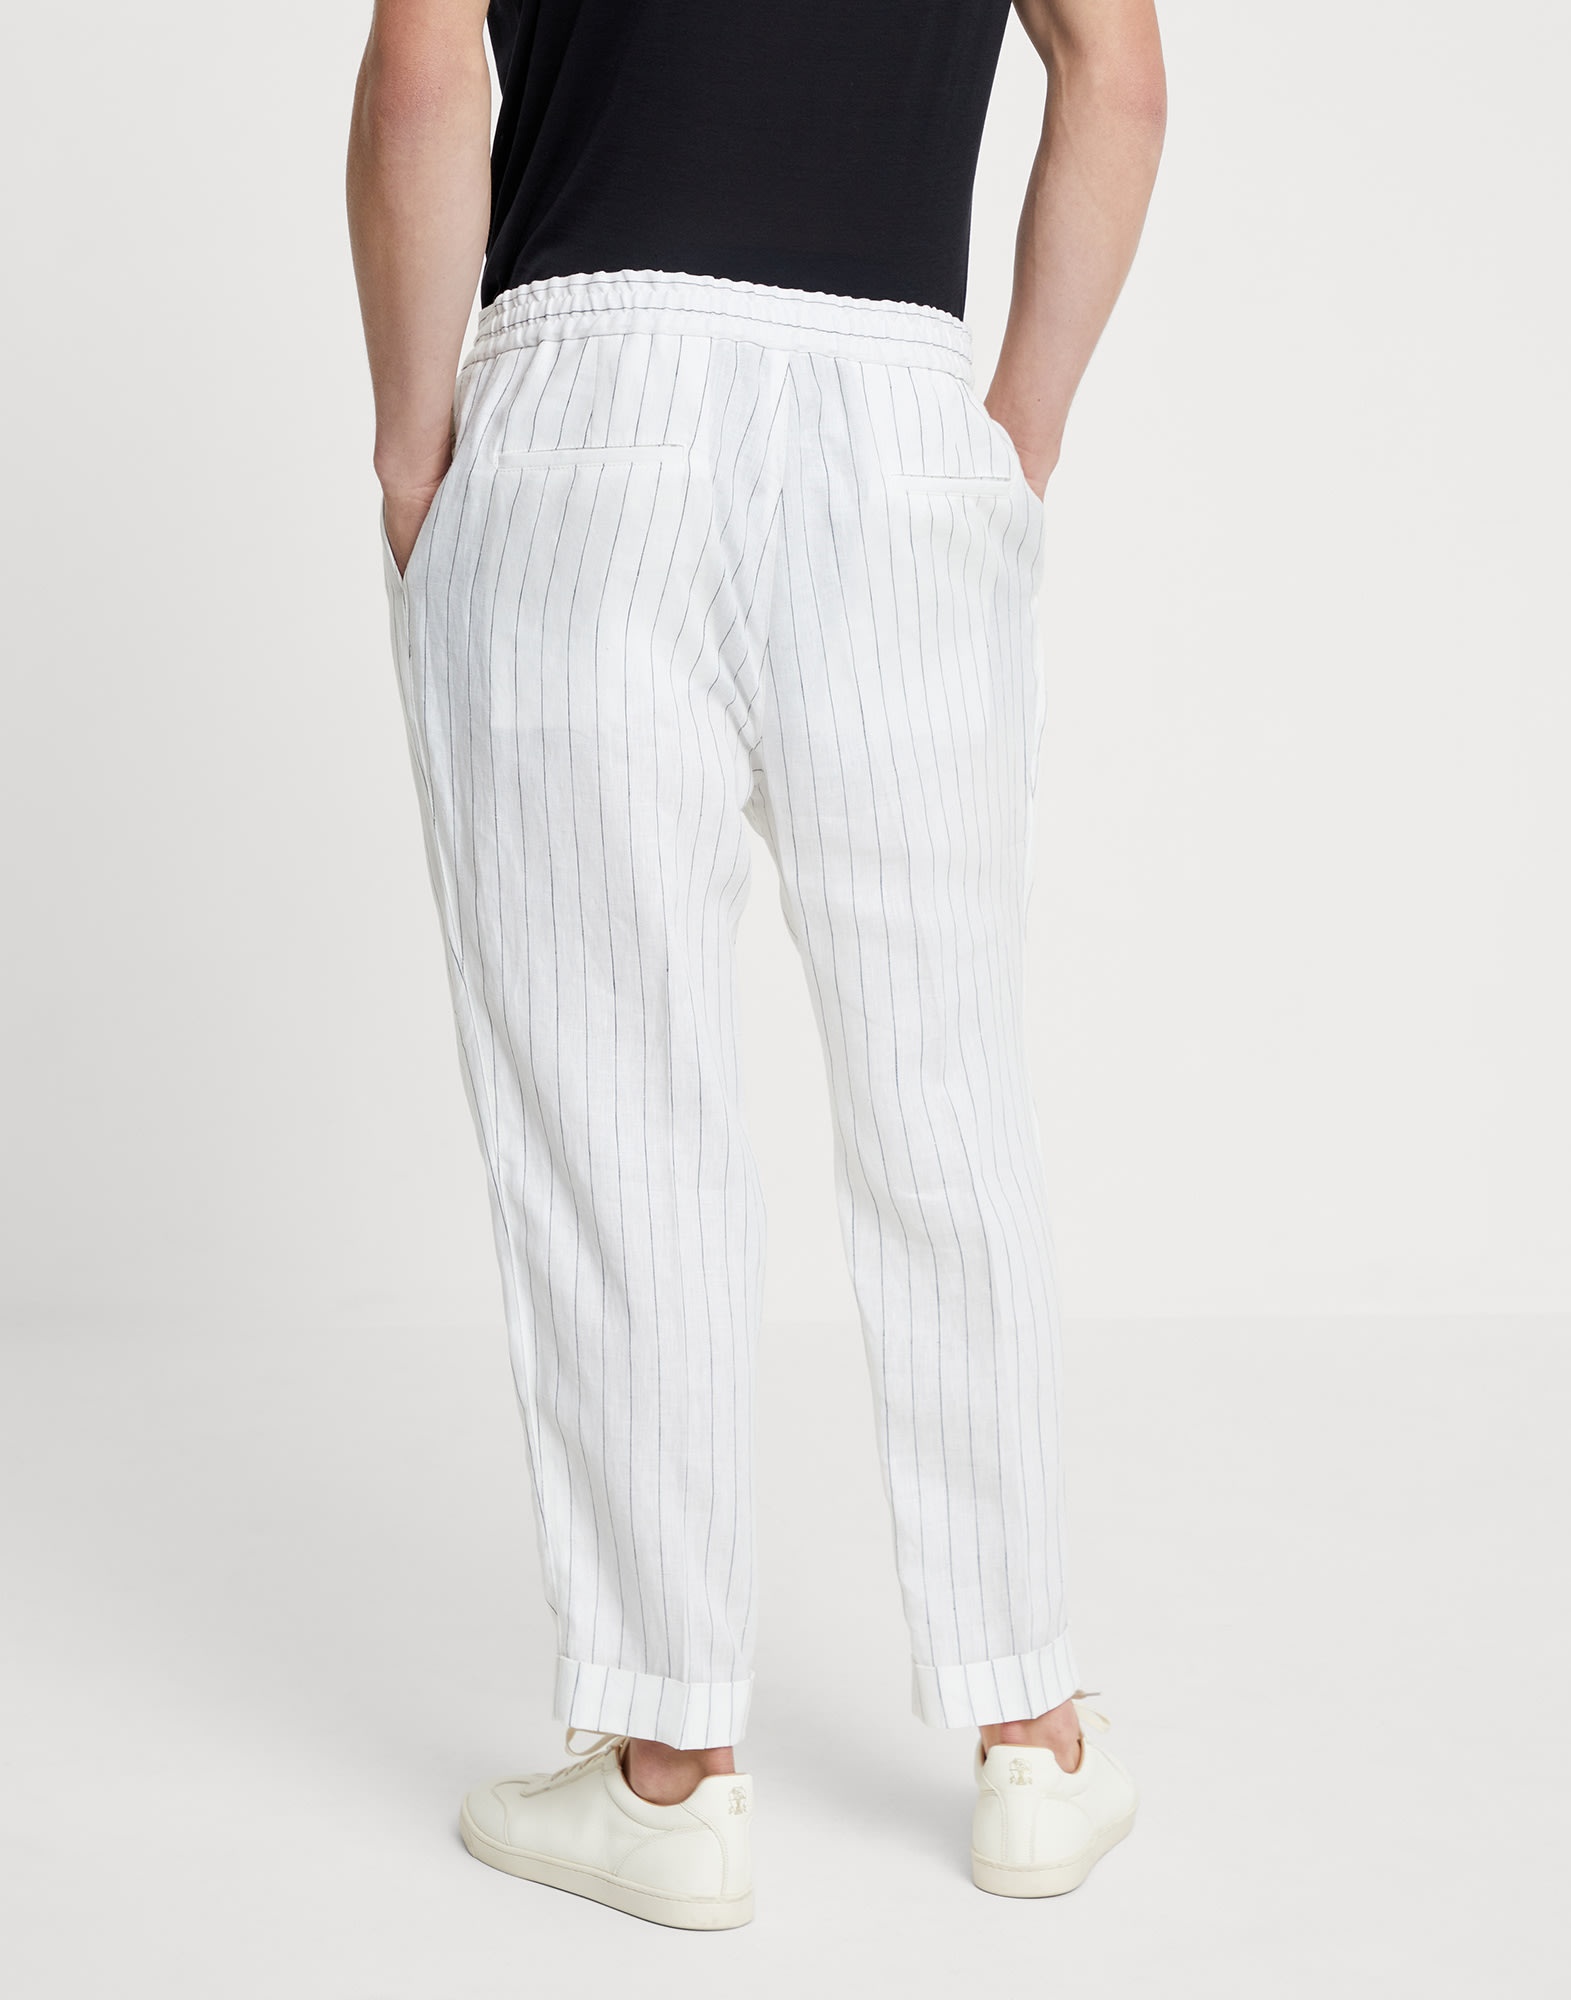 Linen chalk stripe leisure fit trousers with drawstring and double pleats - 2